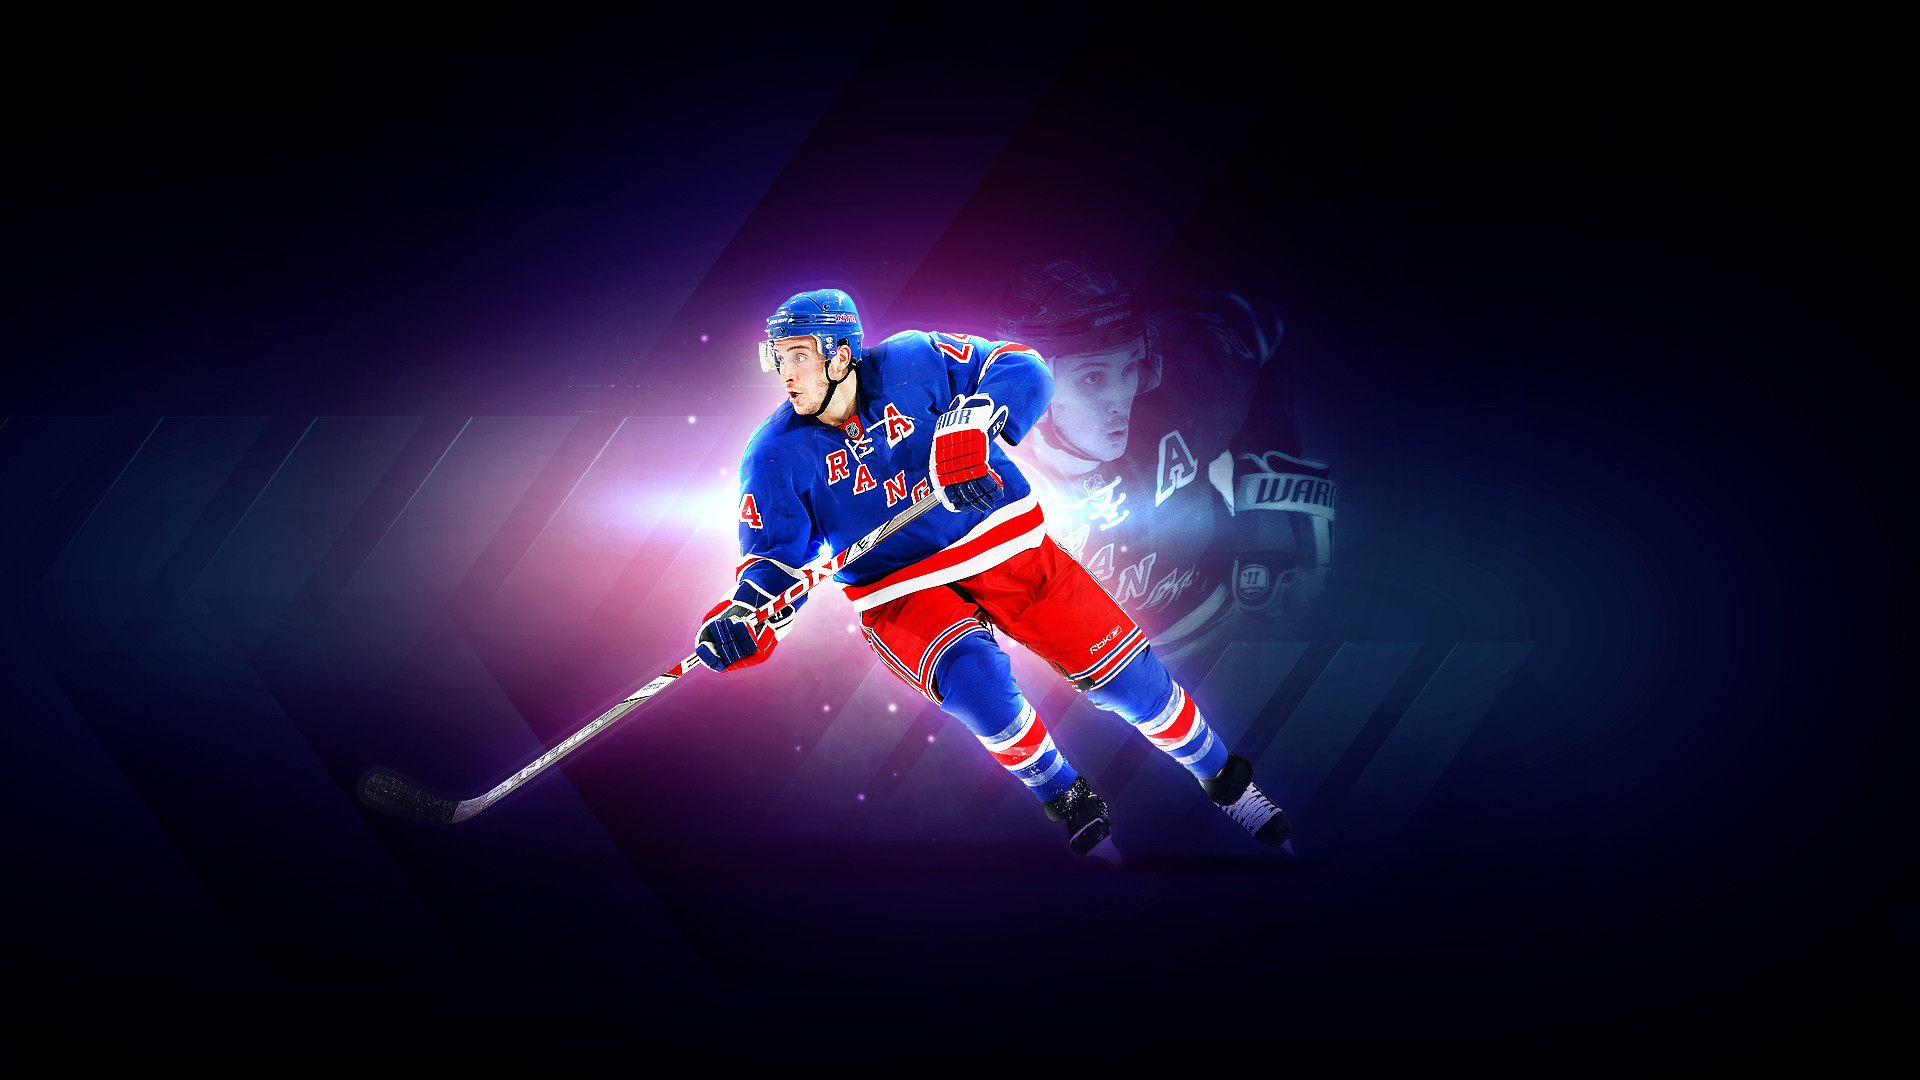 Cool Hockey Backgrounds.